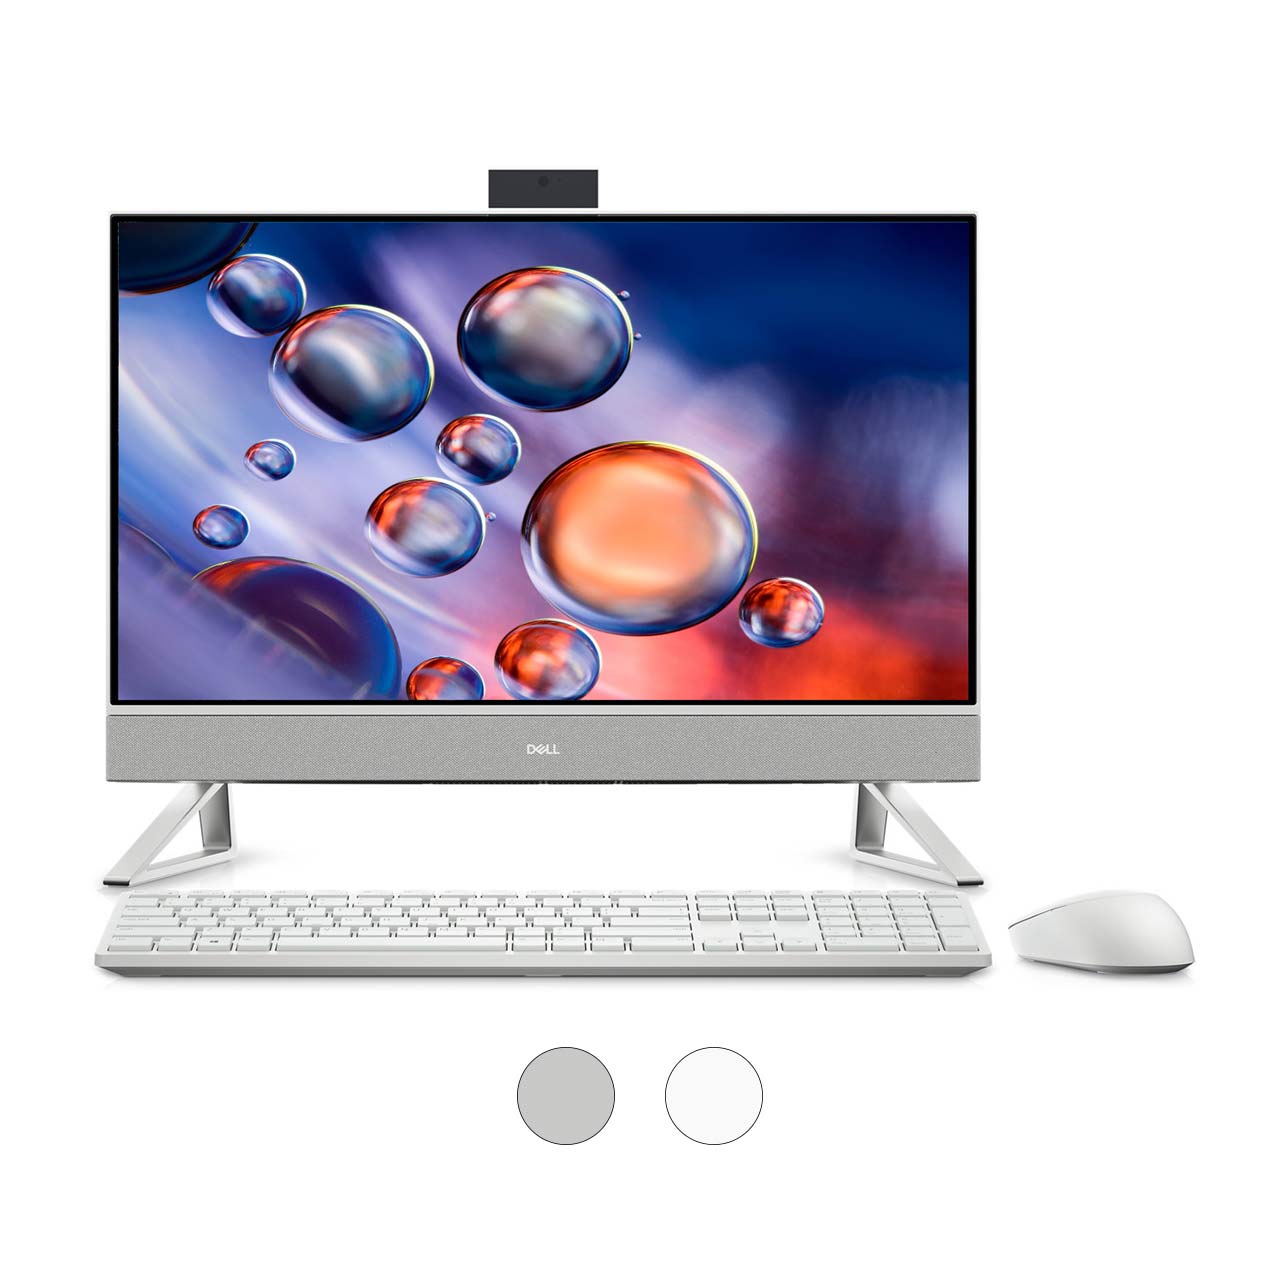 Inspiron 24 5000 (5410) All-in-One